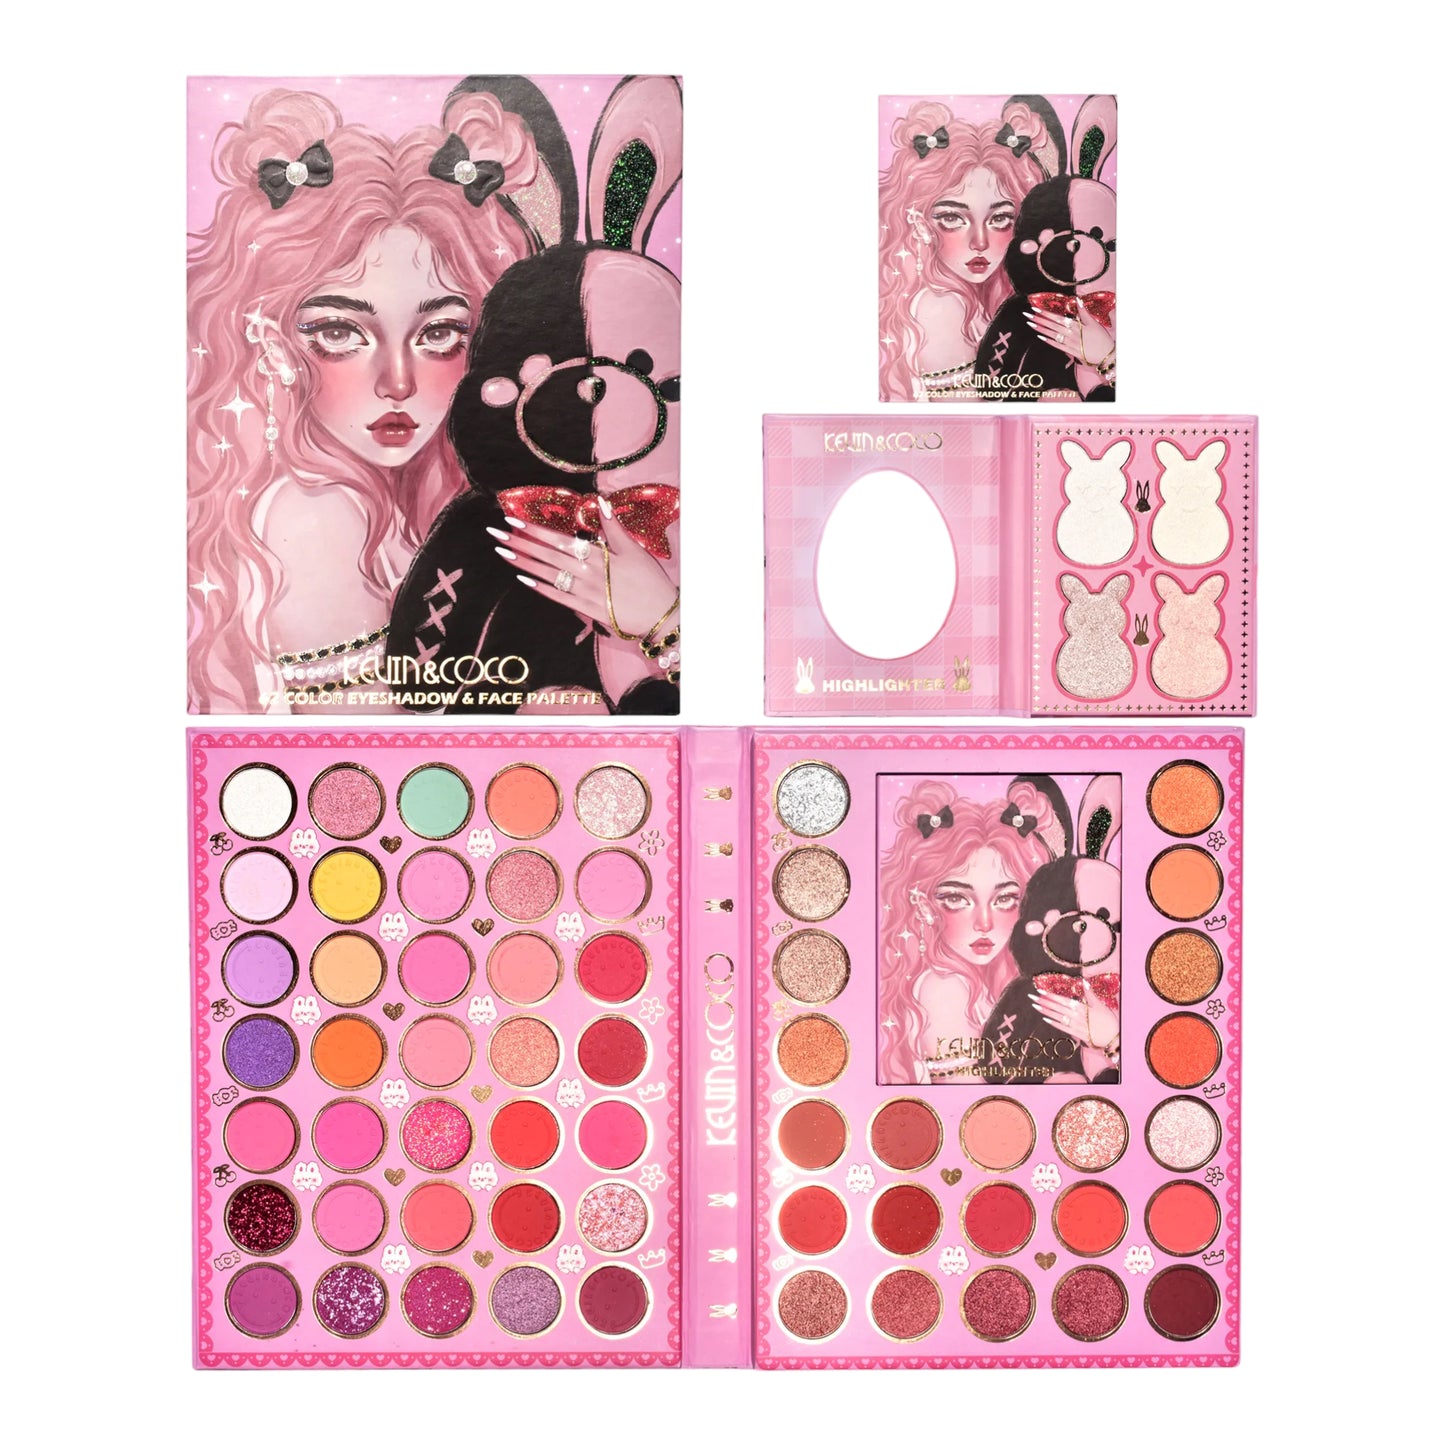 KEVIN&COCO GIRL AND BUNNY 62 COLOR EYESHADOW & FACE PALETTE KC223137 R44